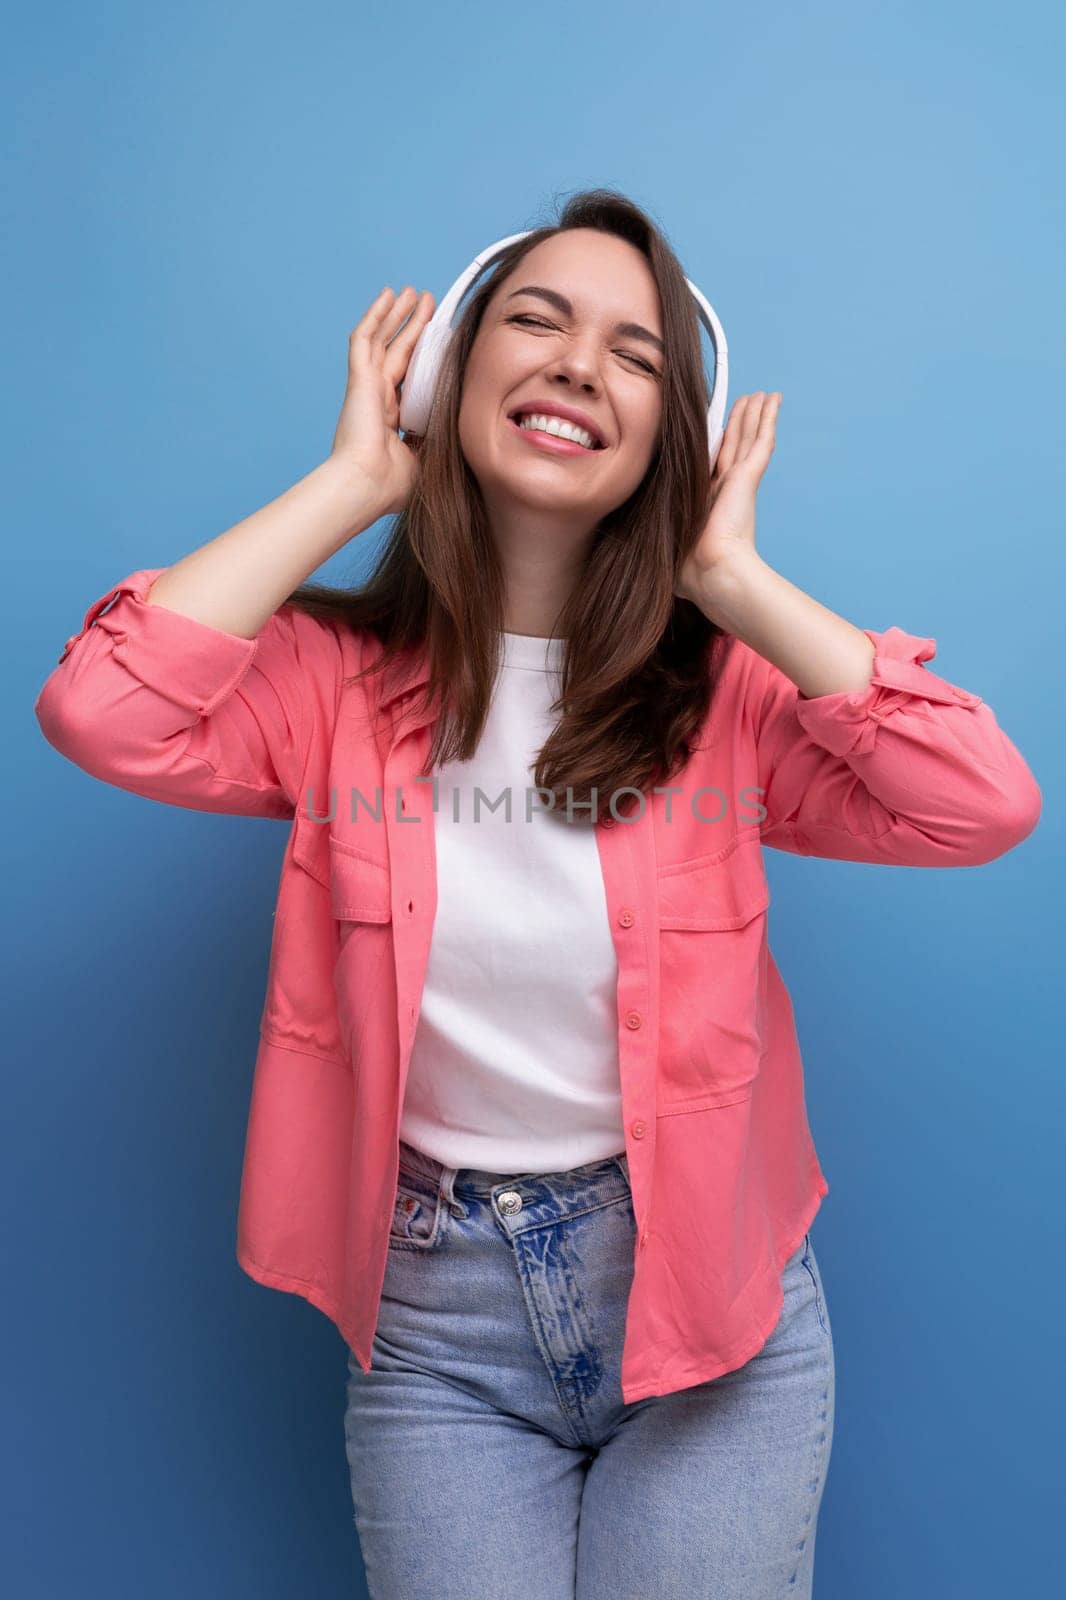 enjoying brunette young woman with dark hair below her shoulders in a shirt and jeans with wireless headphones.